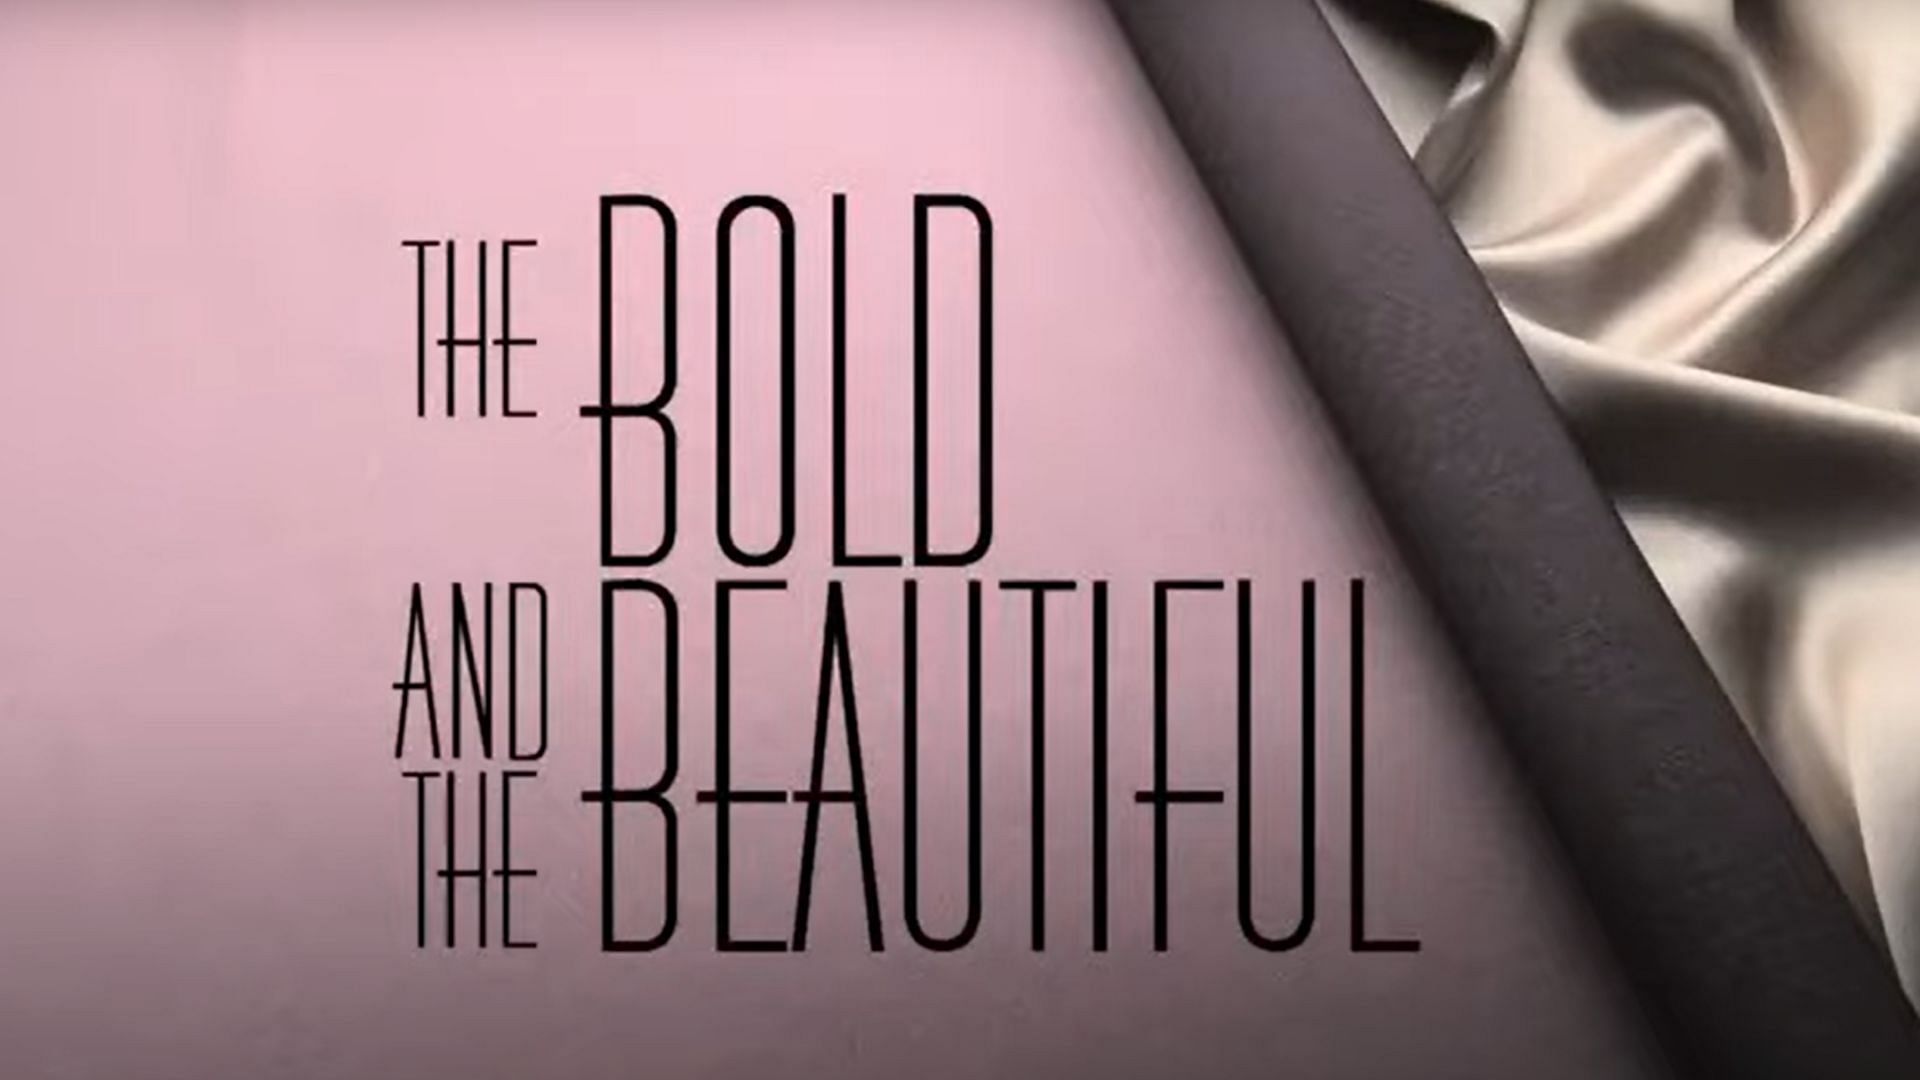 The Bold and the Beautiful is bringing back Emma